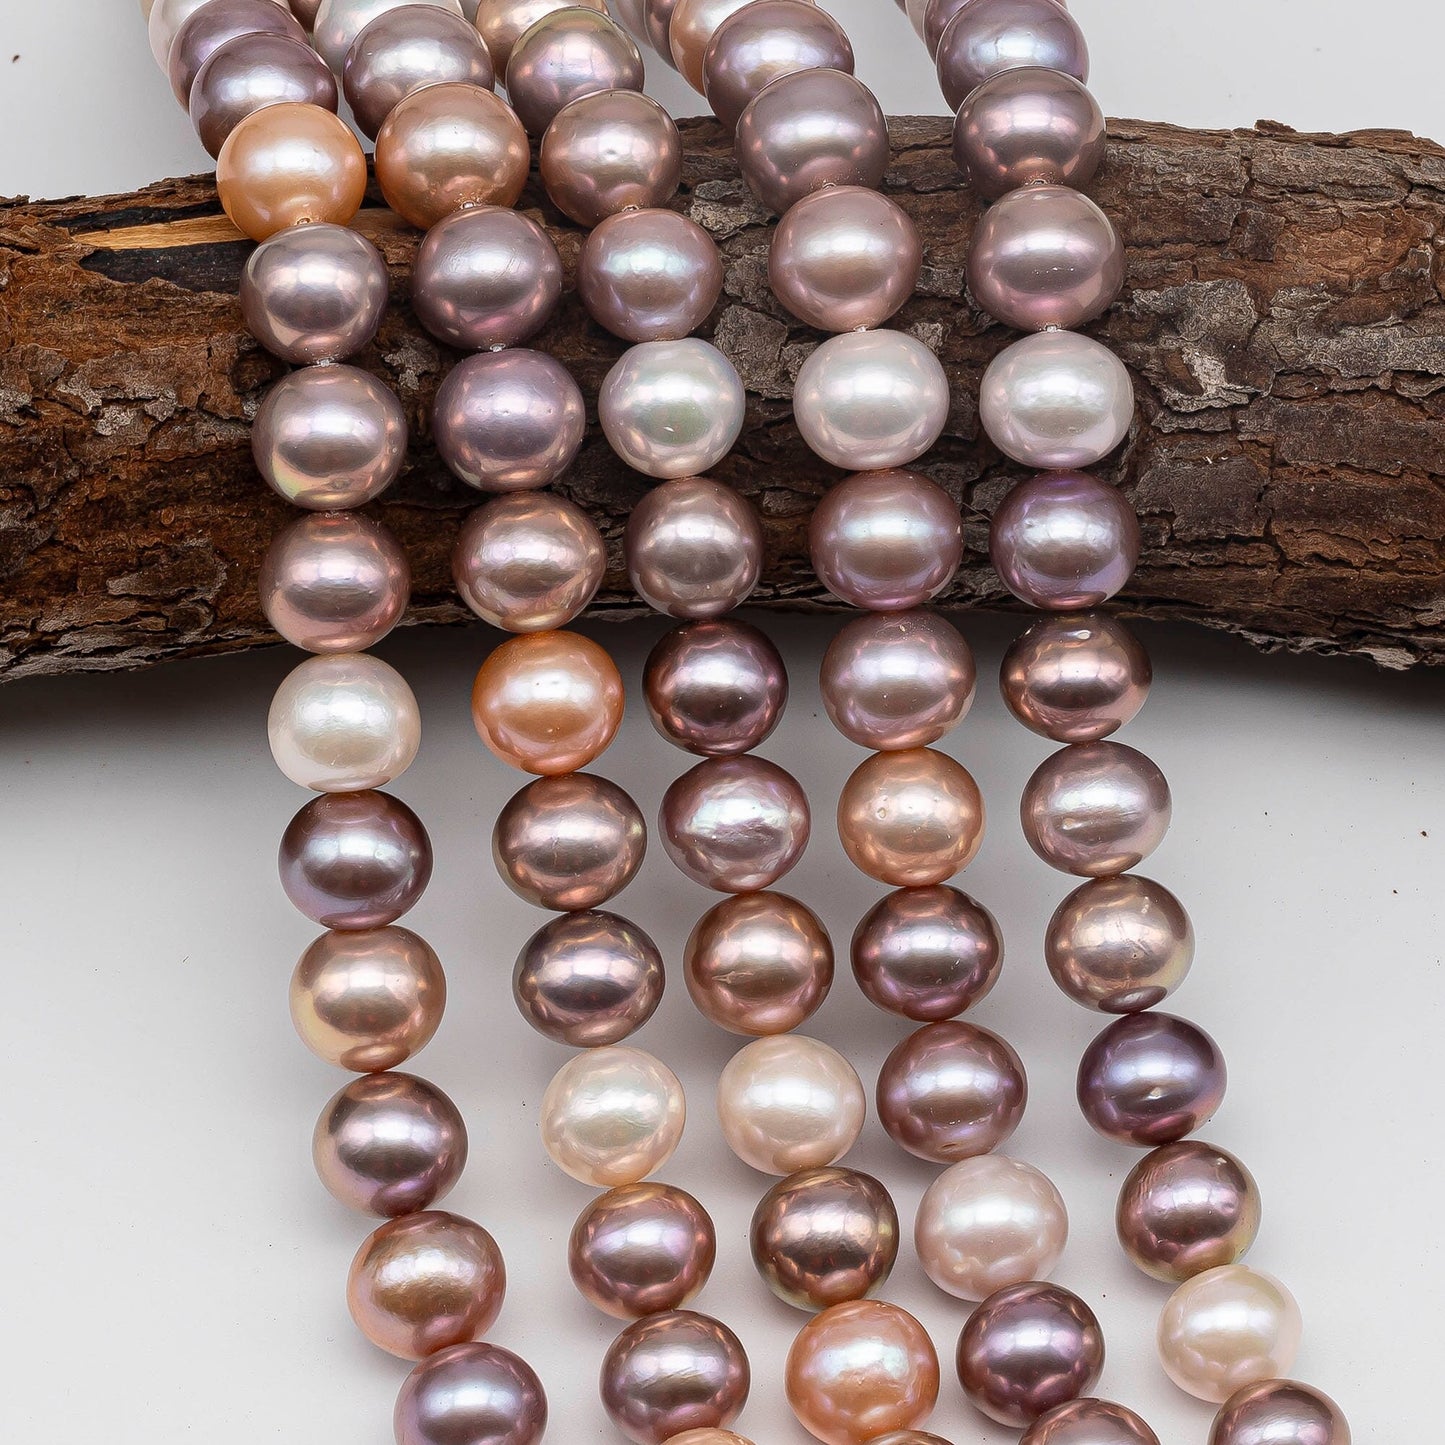 10-12mm Near Round Edison Pearl in Natural Multi-Color in Full Strand, Freshwater Pearl Bead Potato Shape with High Luster, SKU # 1423EP